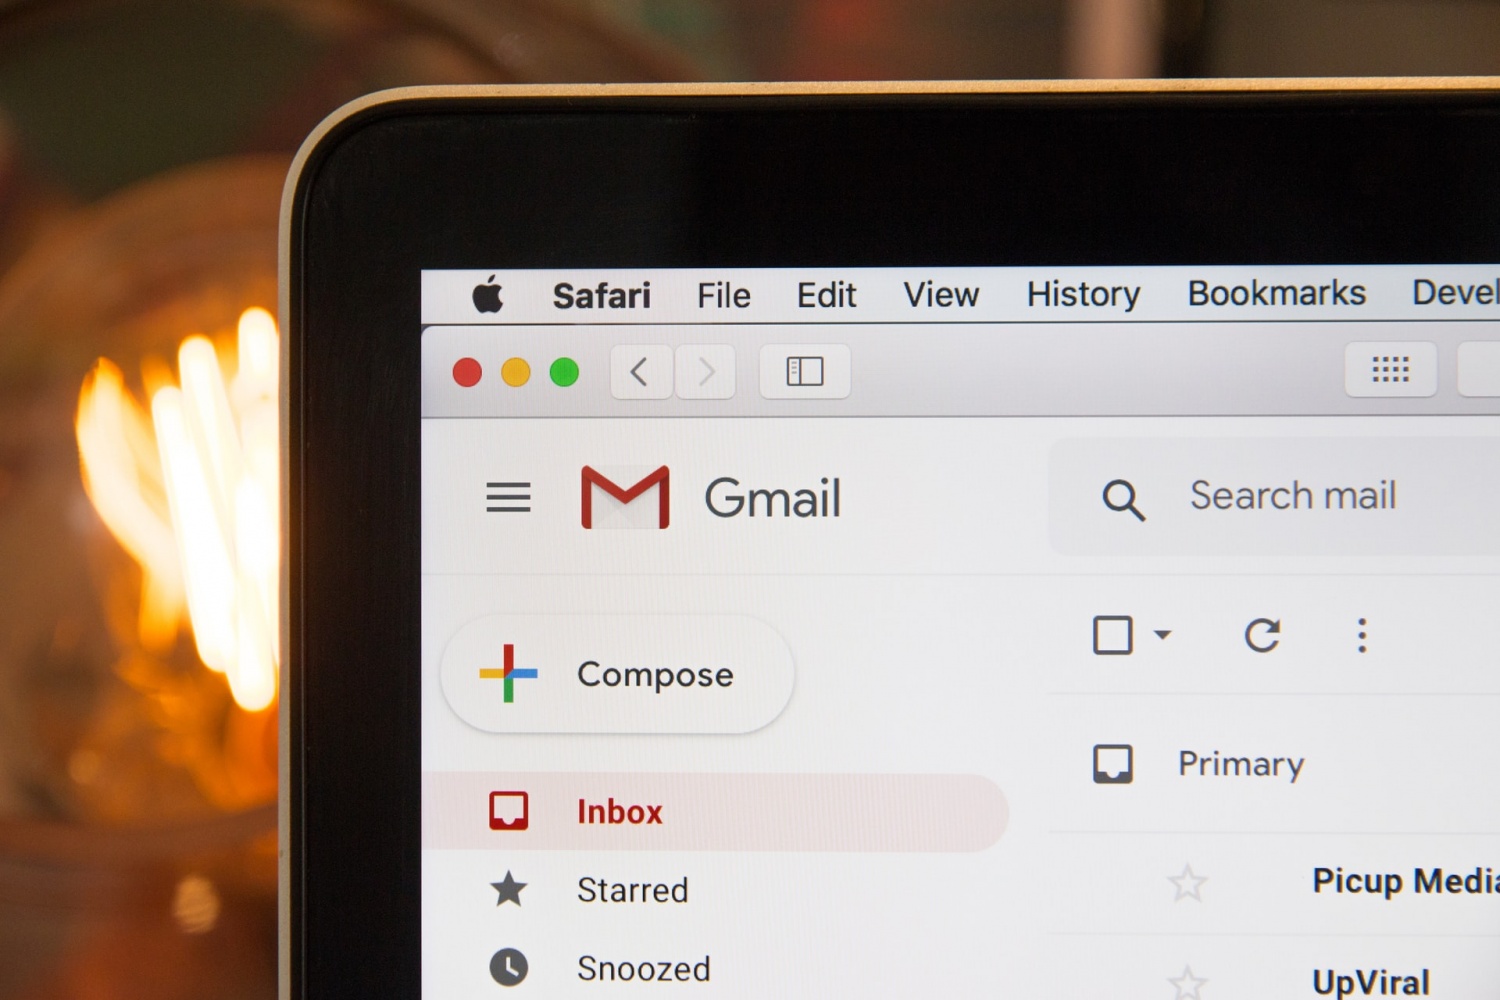 Ultimate Gmail Hack: How to Get Multiple Free Email Addresses With Just 1 Account, Avoid Spams